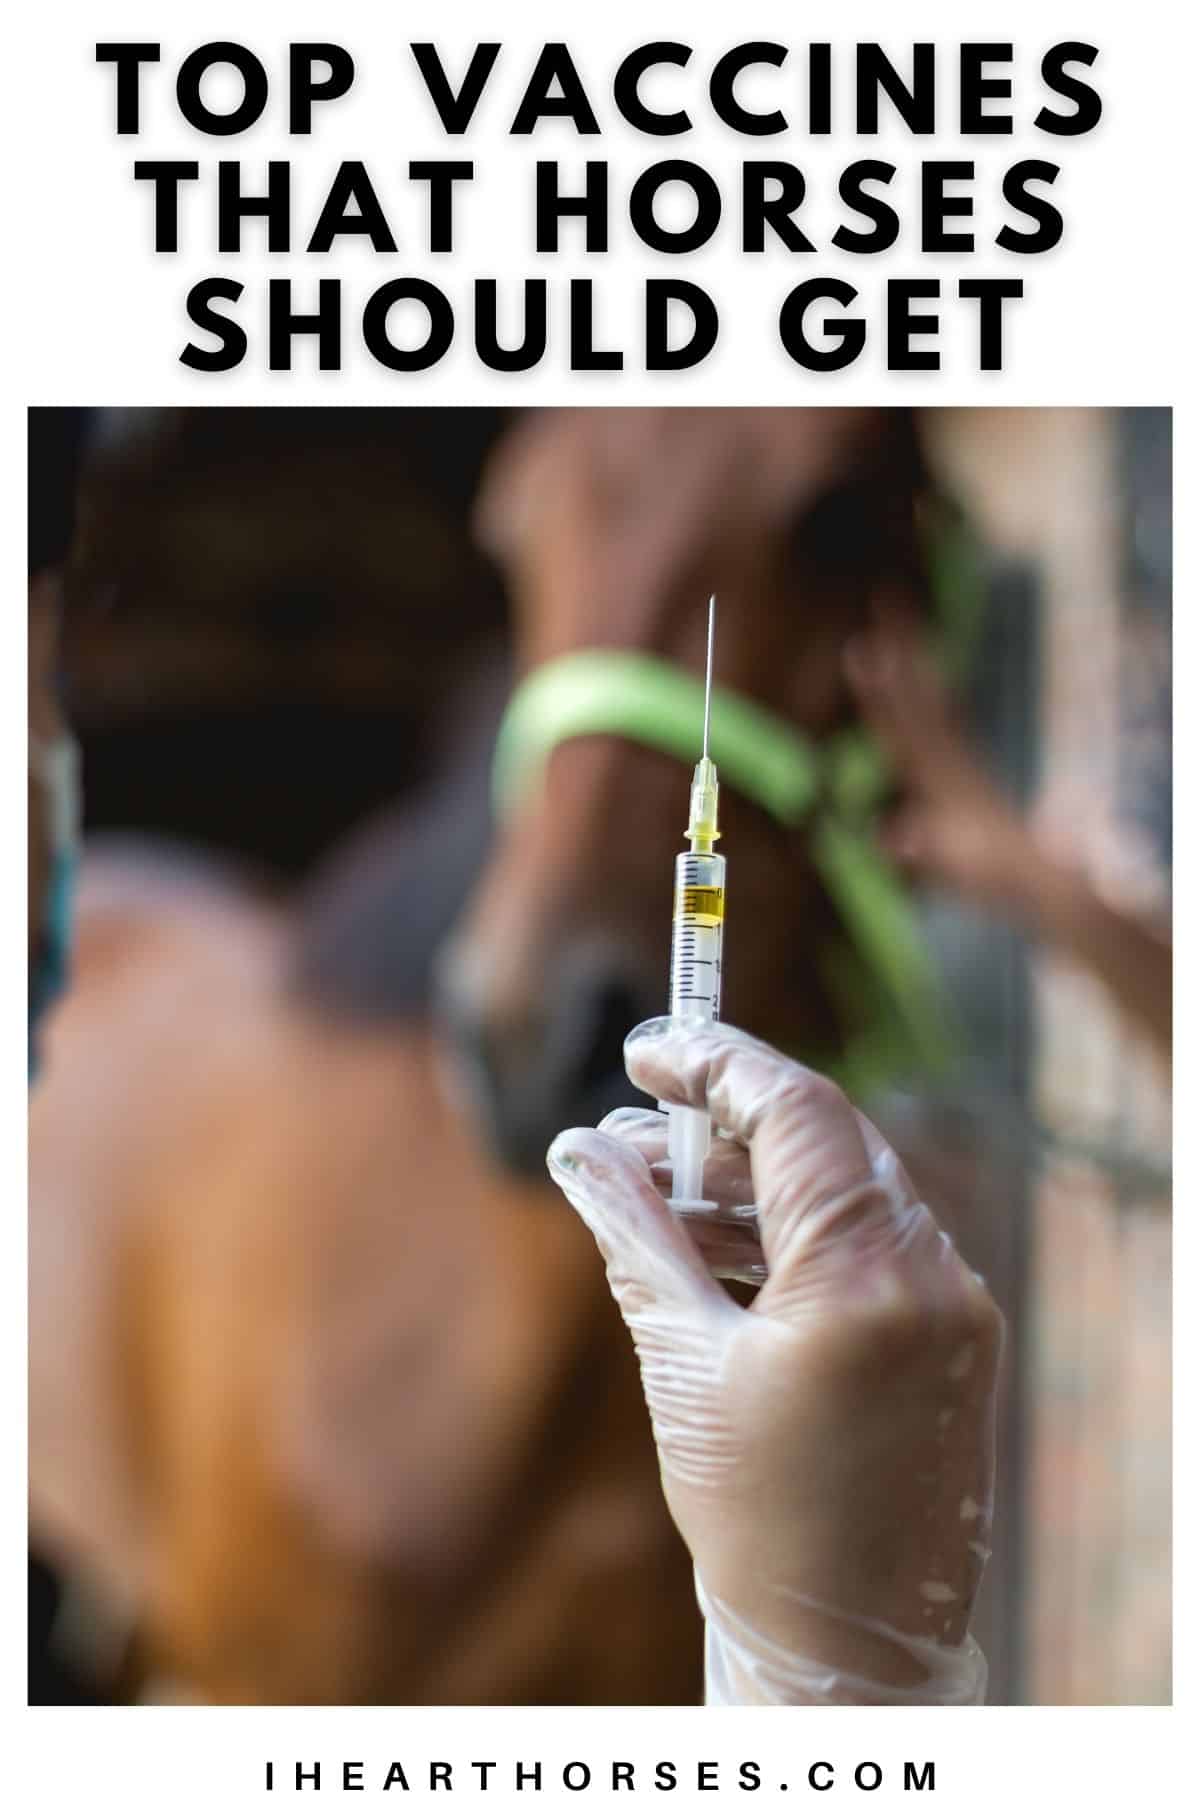 Syringe in foreground with horse in background